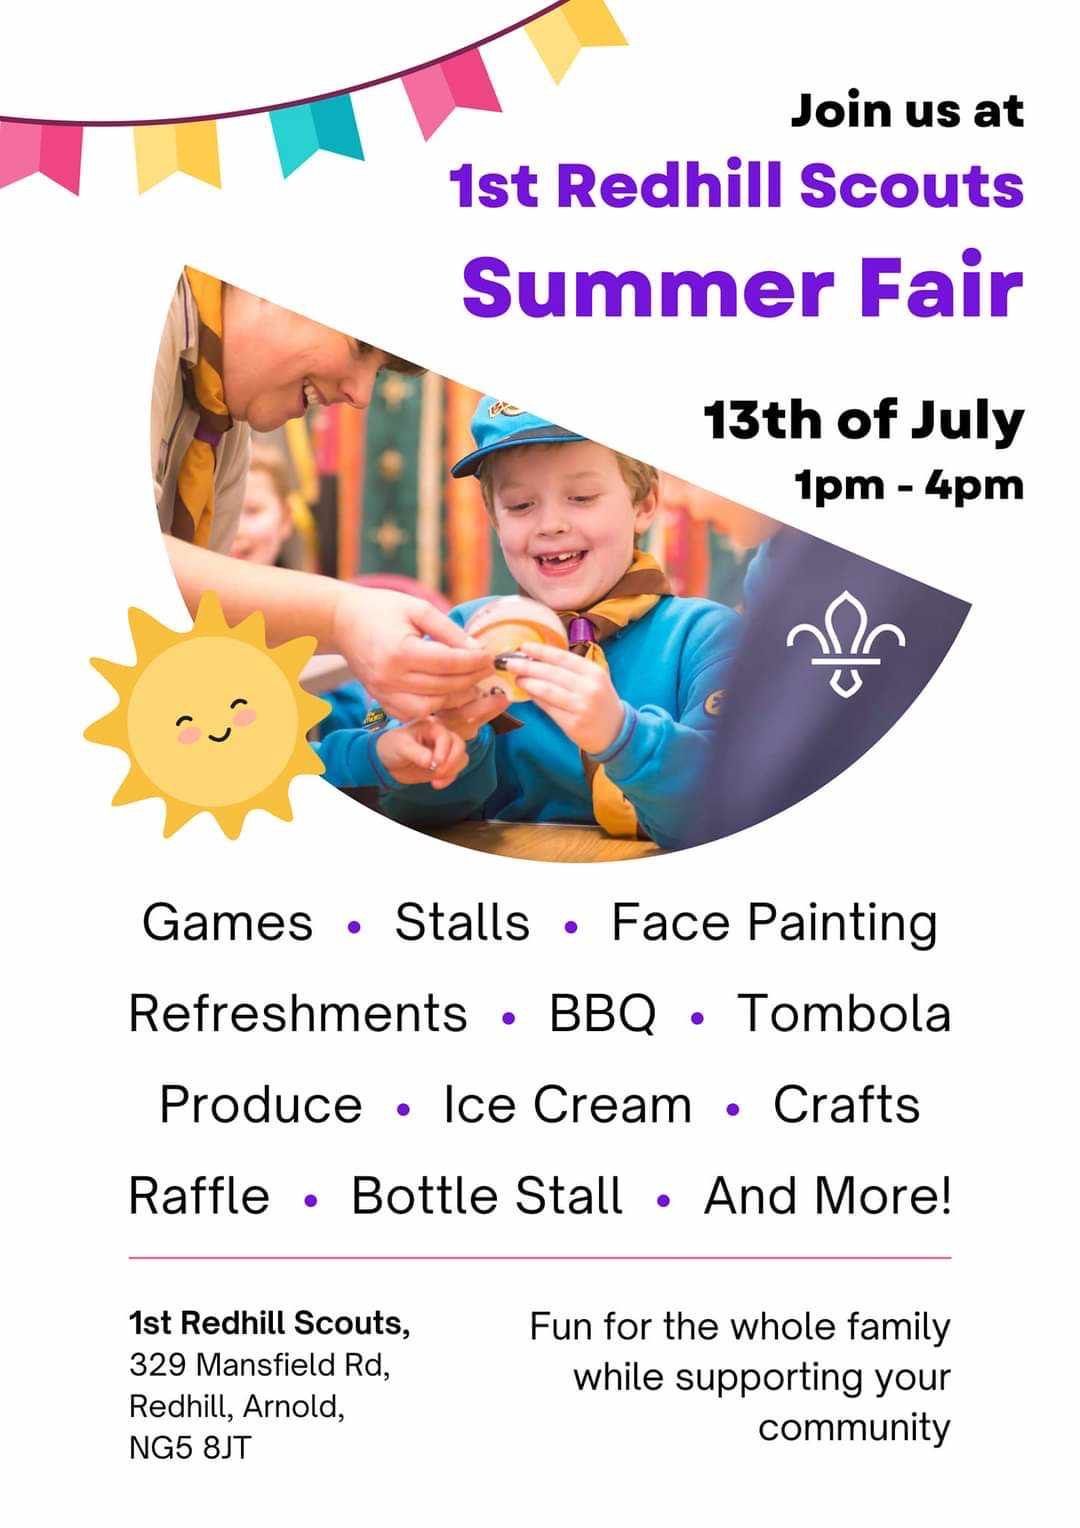 1st Redhill Scouts summer fair 